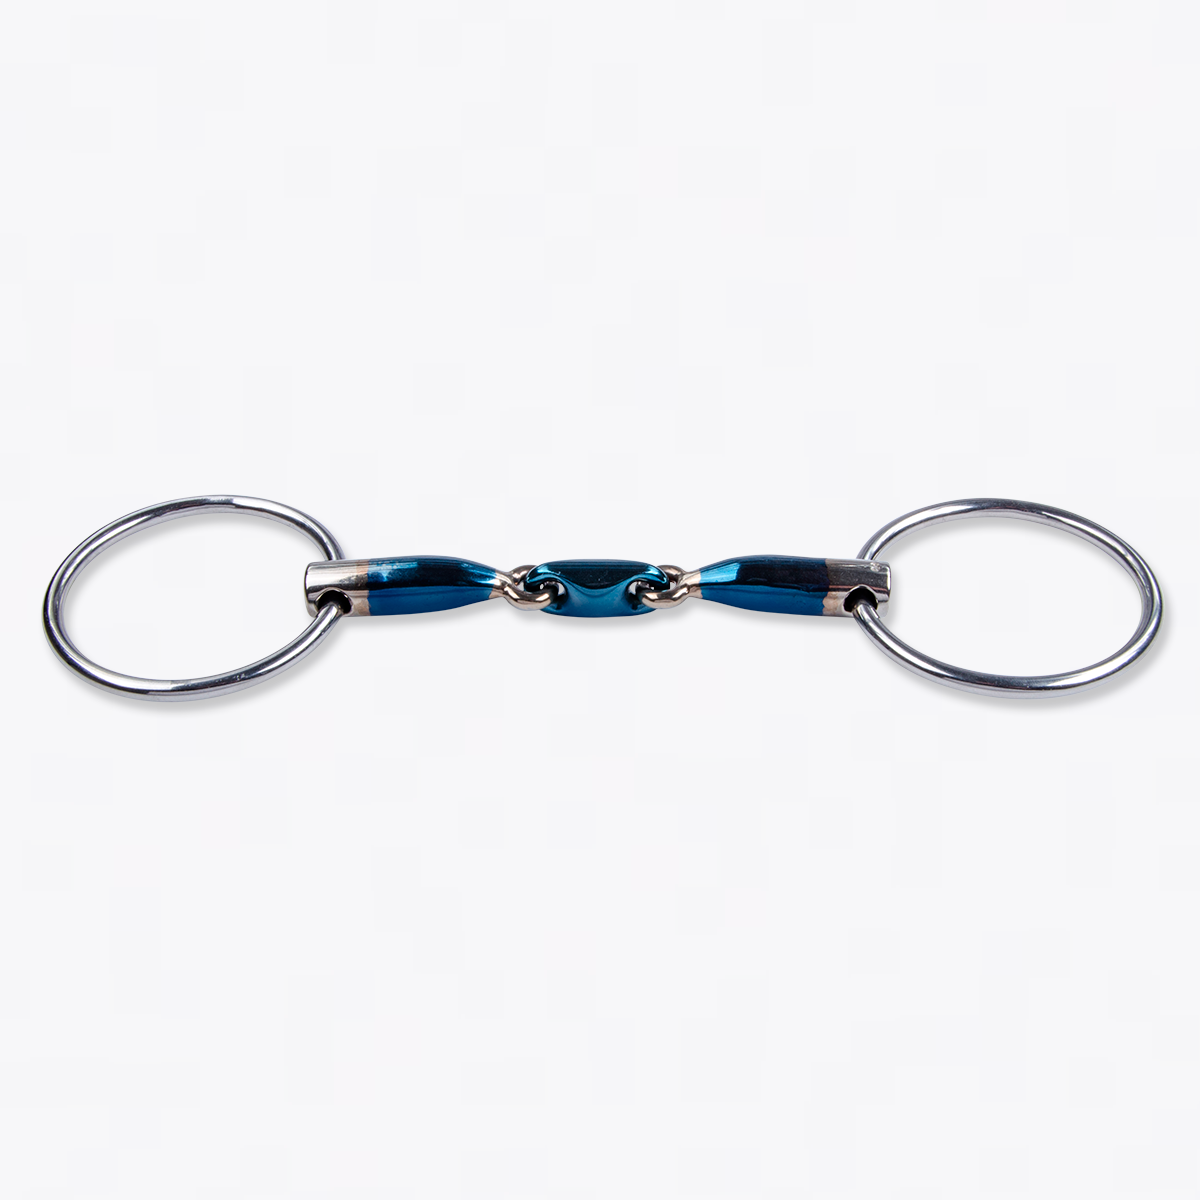 TRUST BITS DOUBLE JOINTED SNAFFLE 16MM